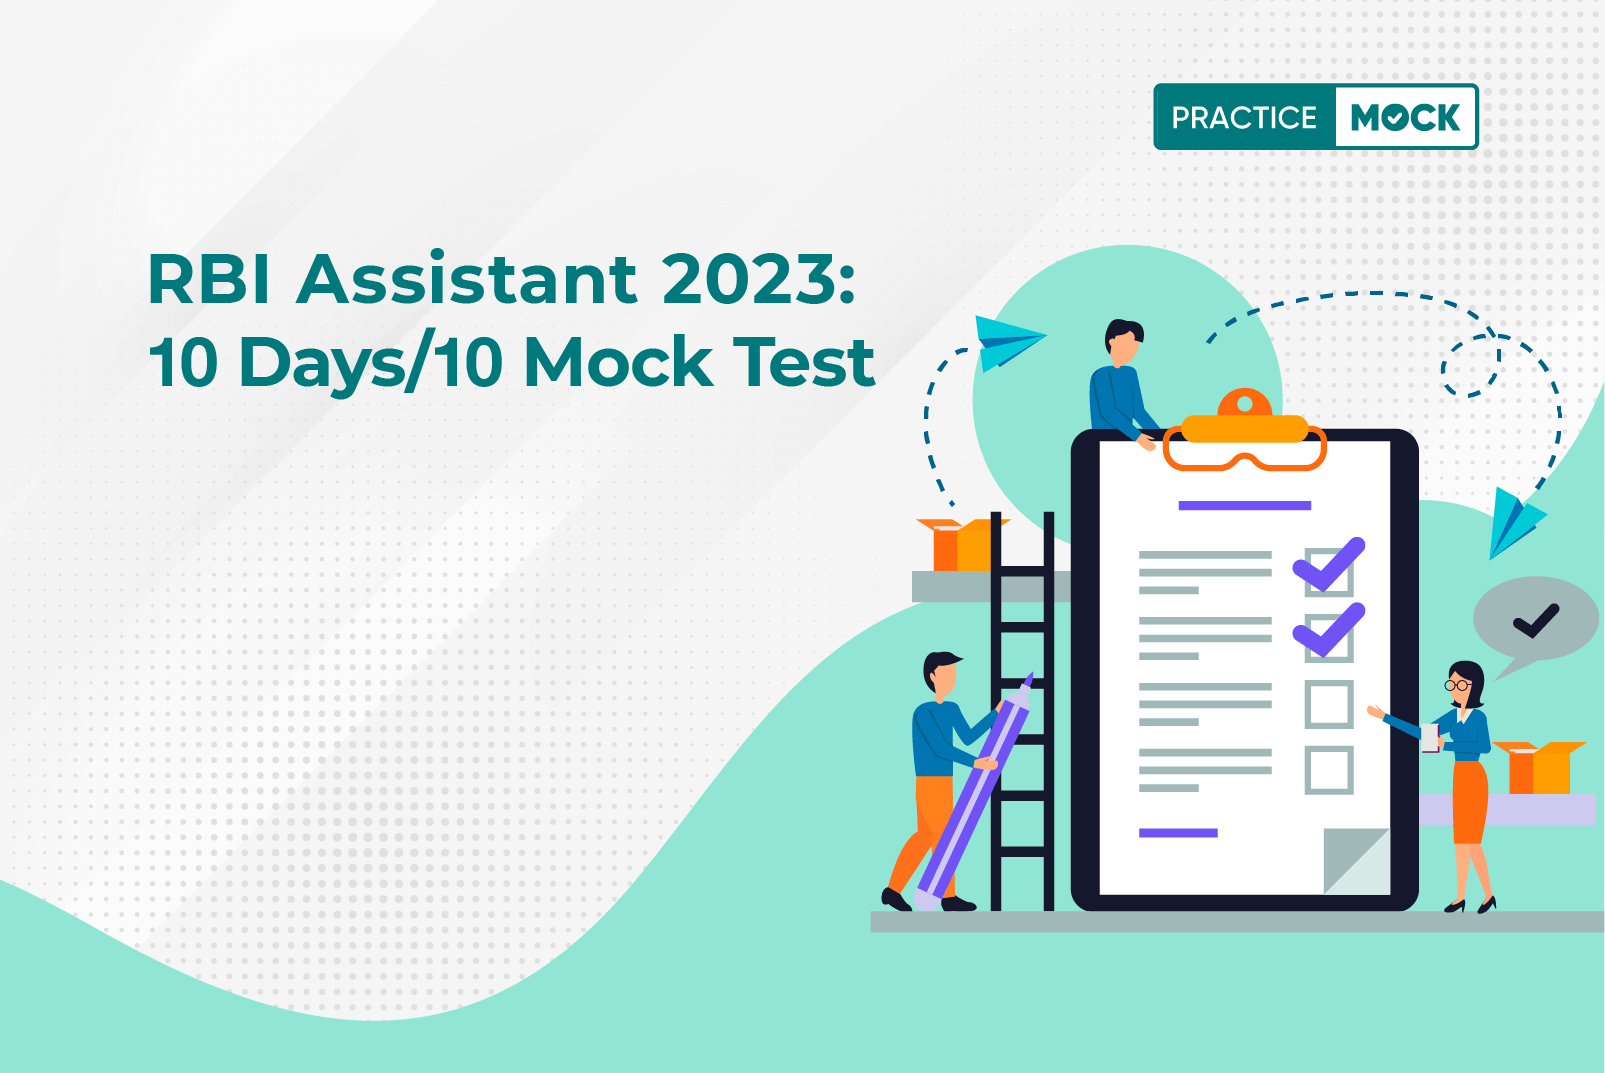 RBI Assistant 2023 Free Mock test